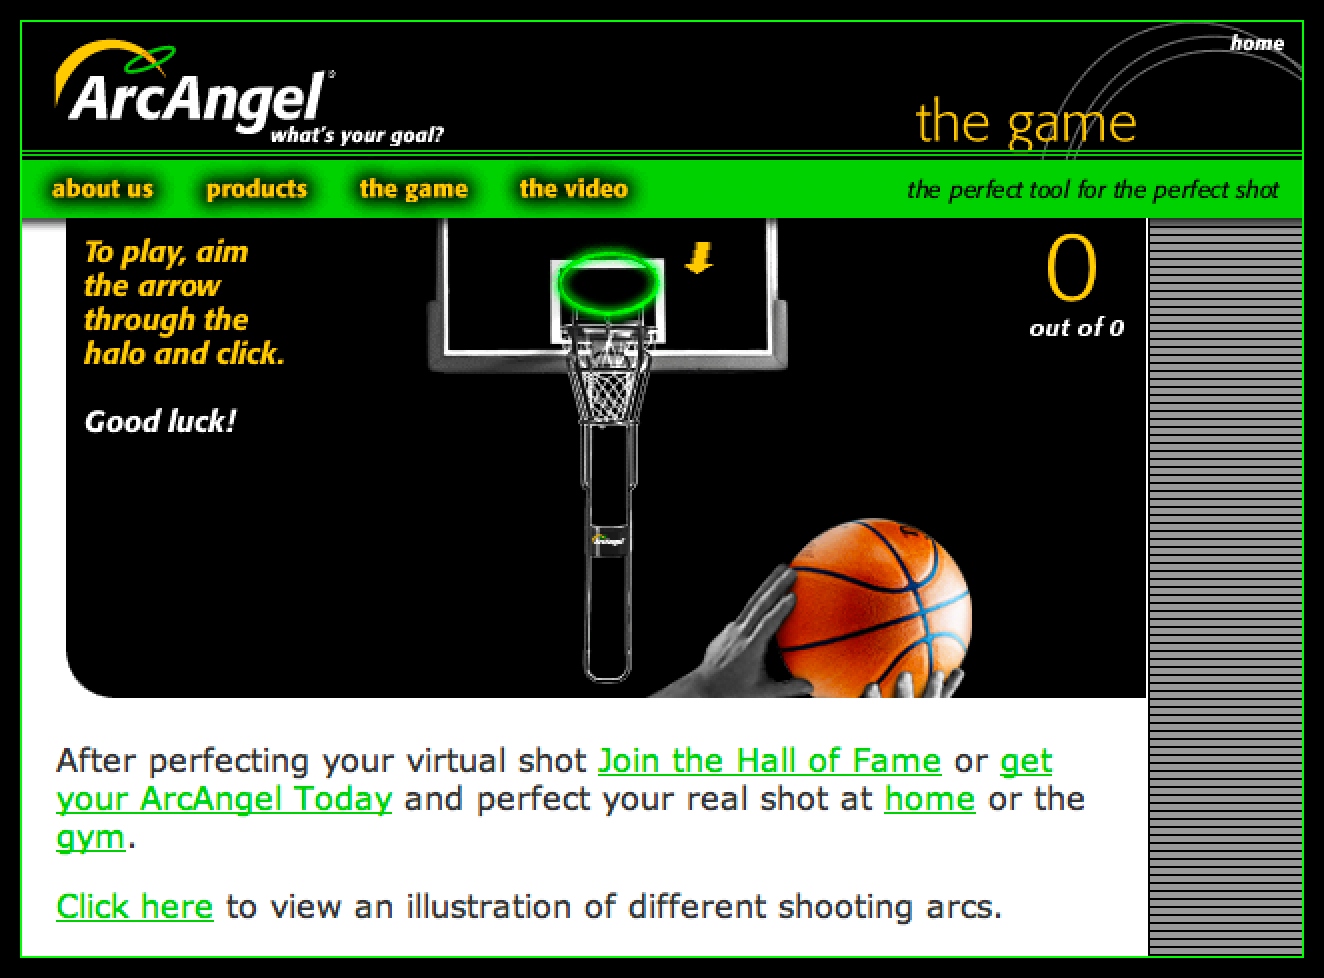 Basketball training game screenshot: shooting aid attached to hoop